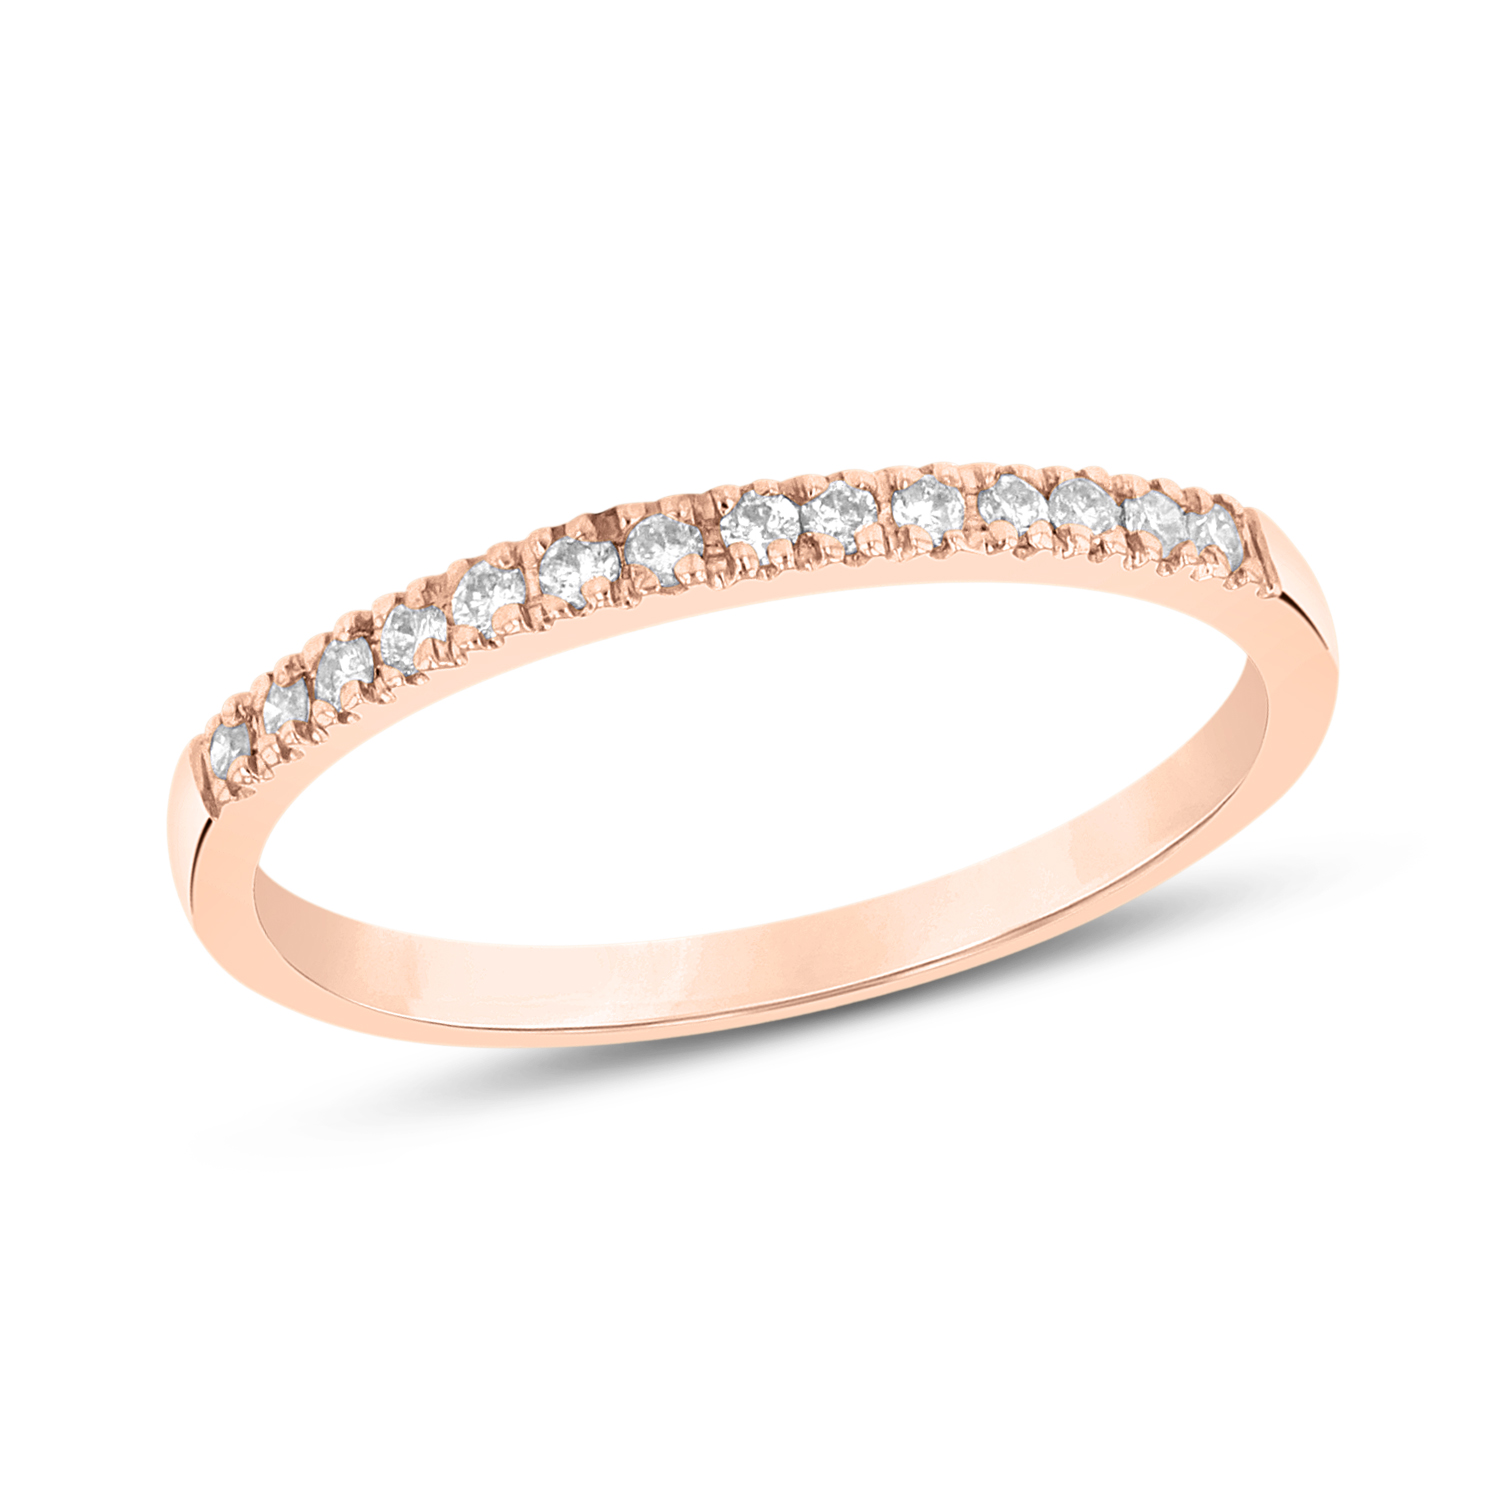 View 0.15ctw Diamond Band in 14k Rose Gold